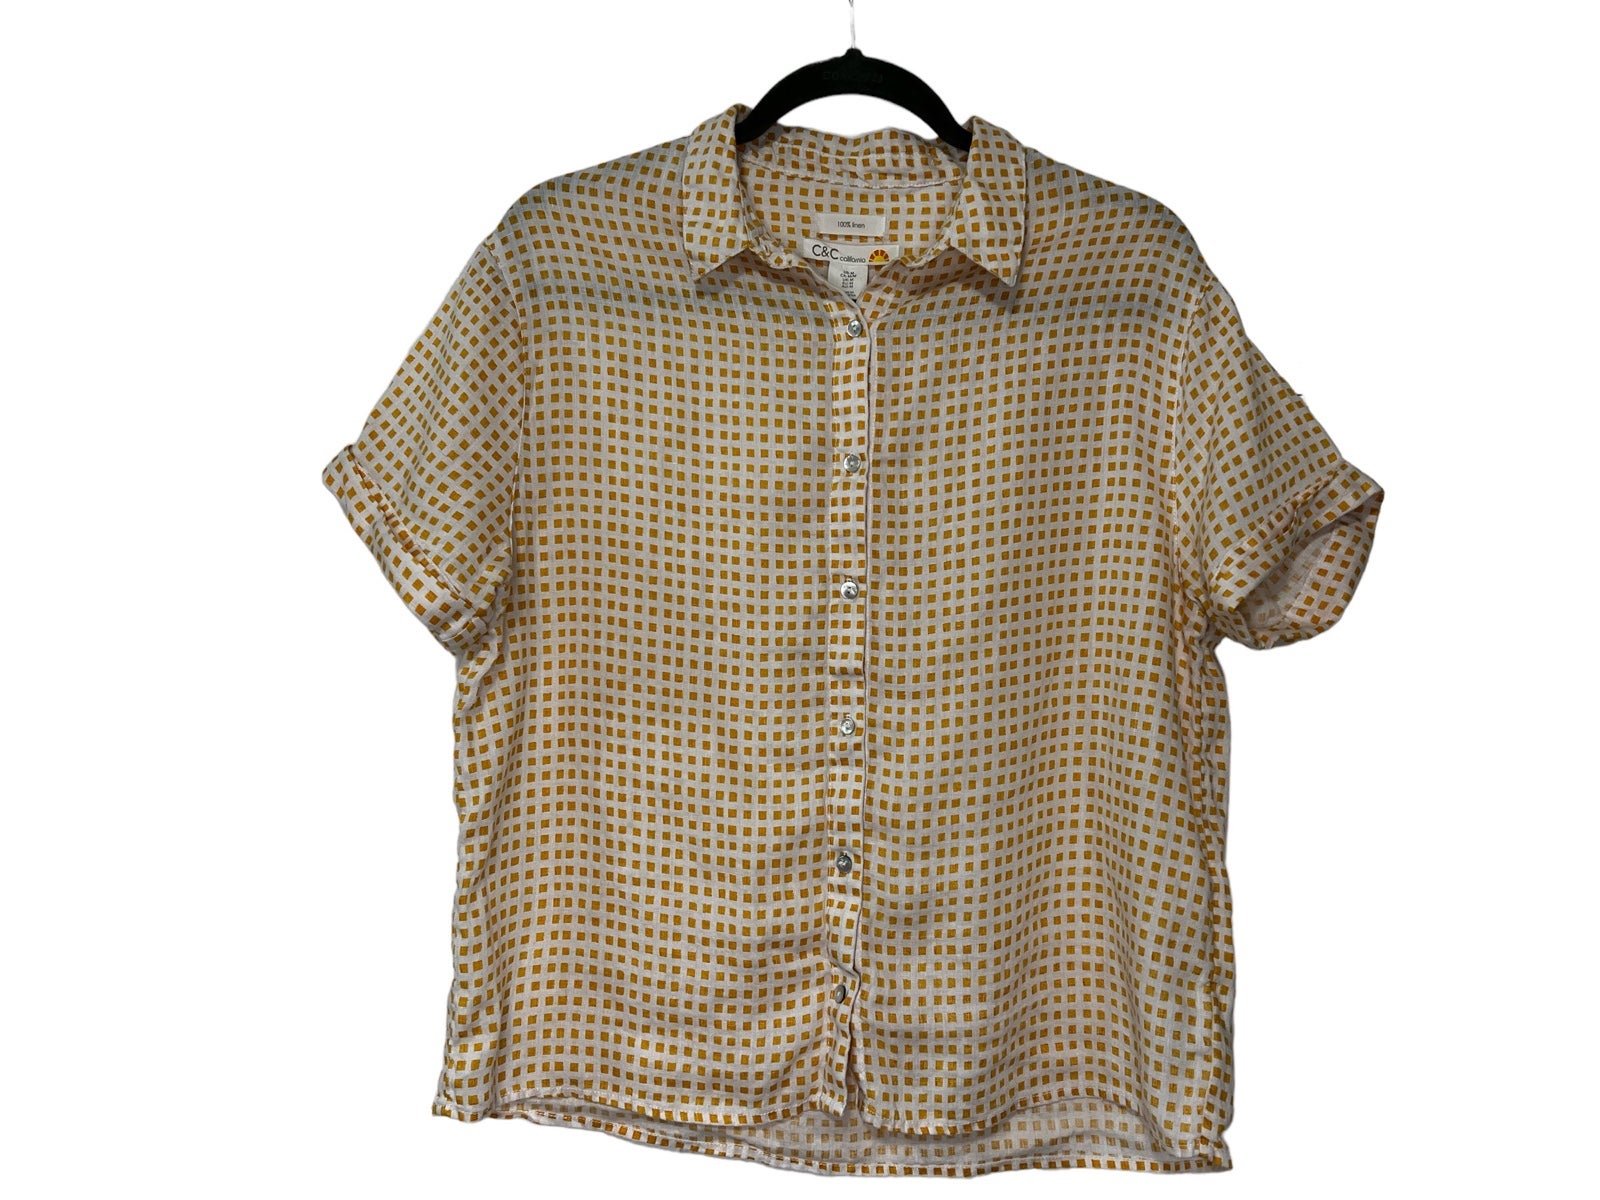 large discount C&C California 100% Linen Gingham Orange and White Button Down Short Sleeve Top peeXdU667 online store